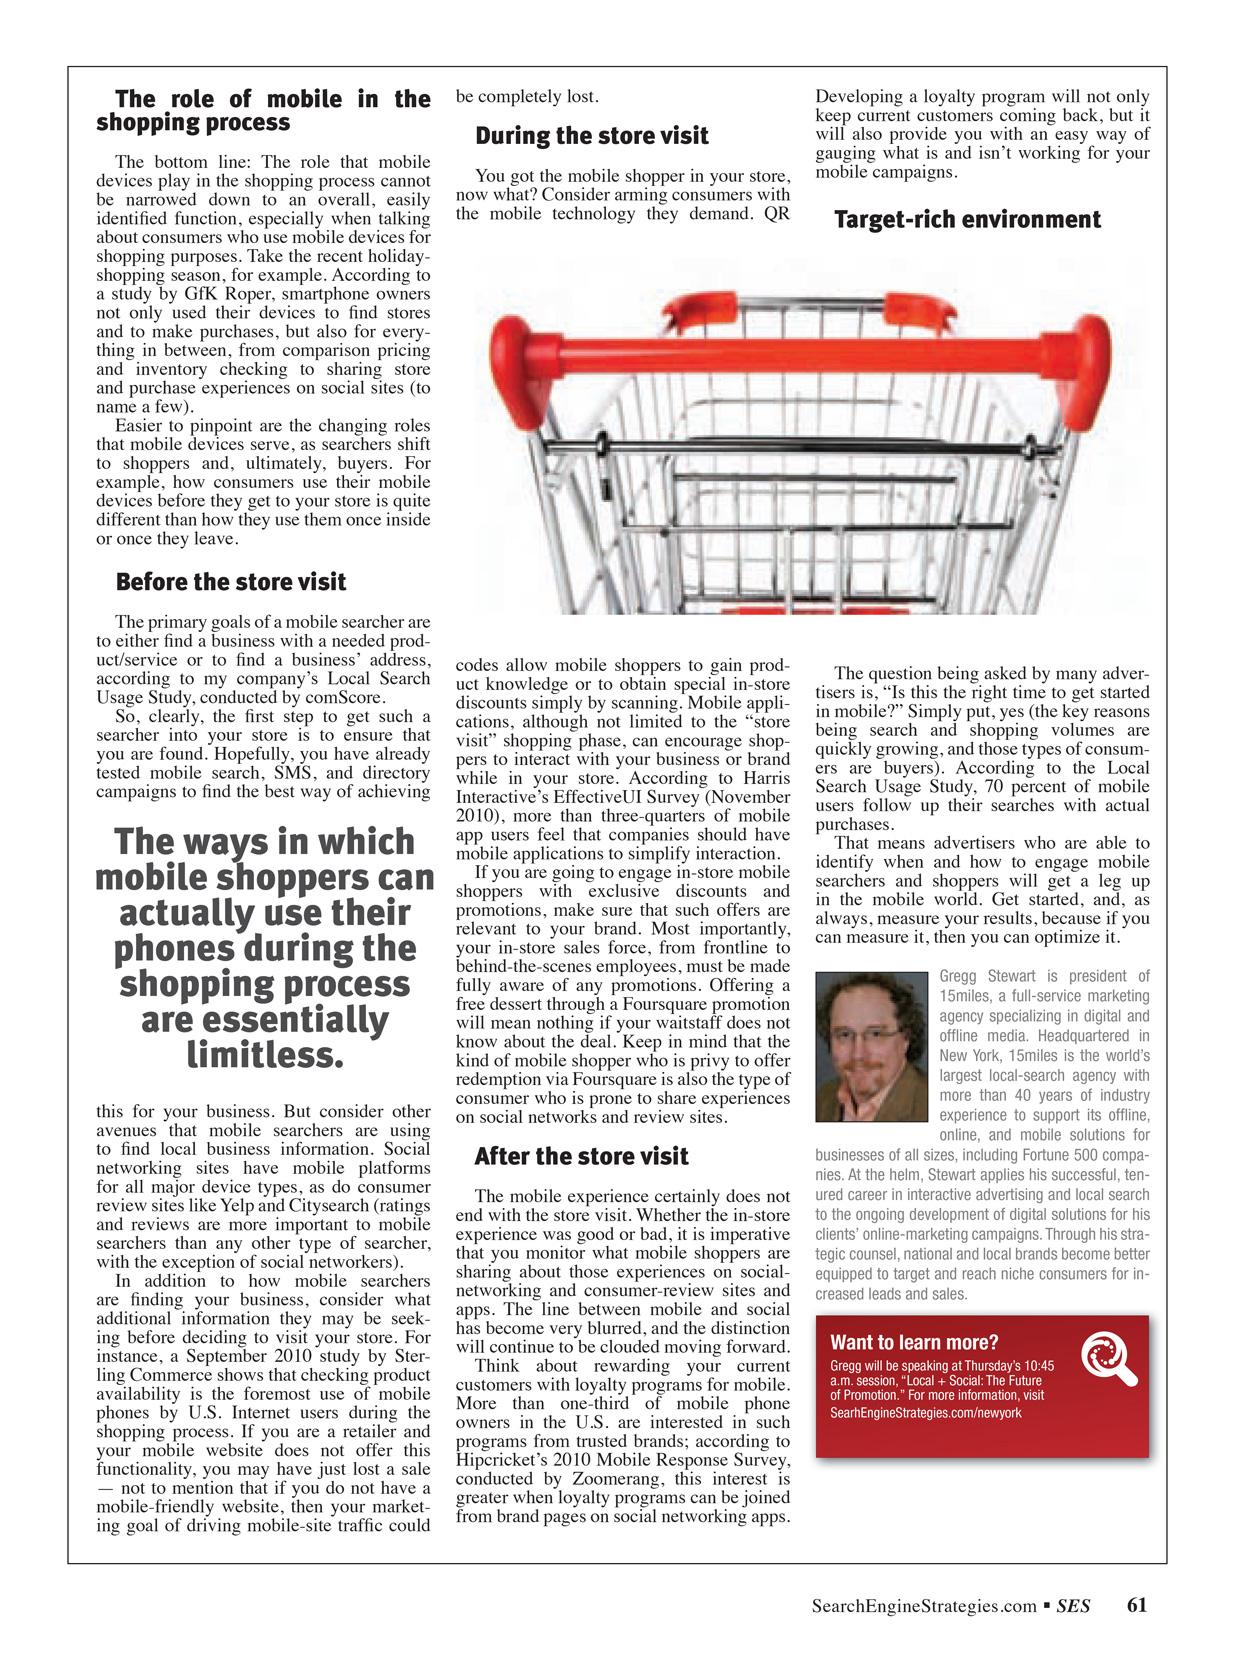 The second page of a feature article that ran in SES Magazine before I redesigned the publication. A large part of the page is taken up by a stock image of a shopping cart.